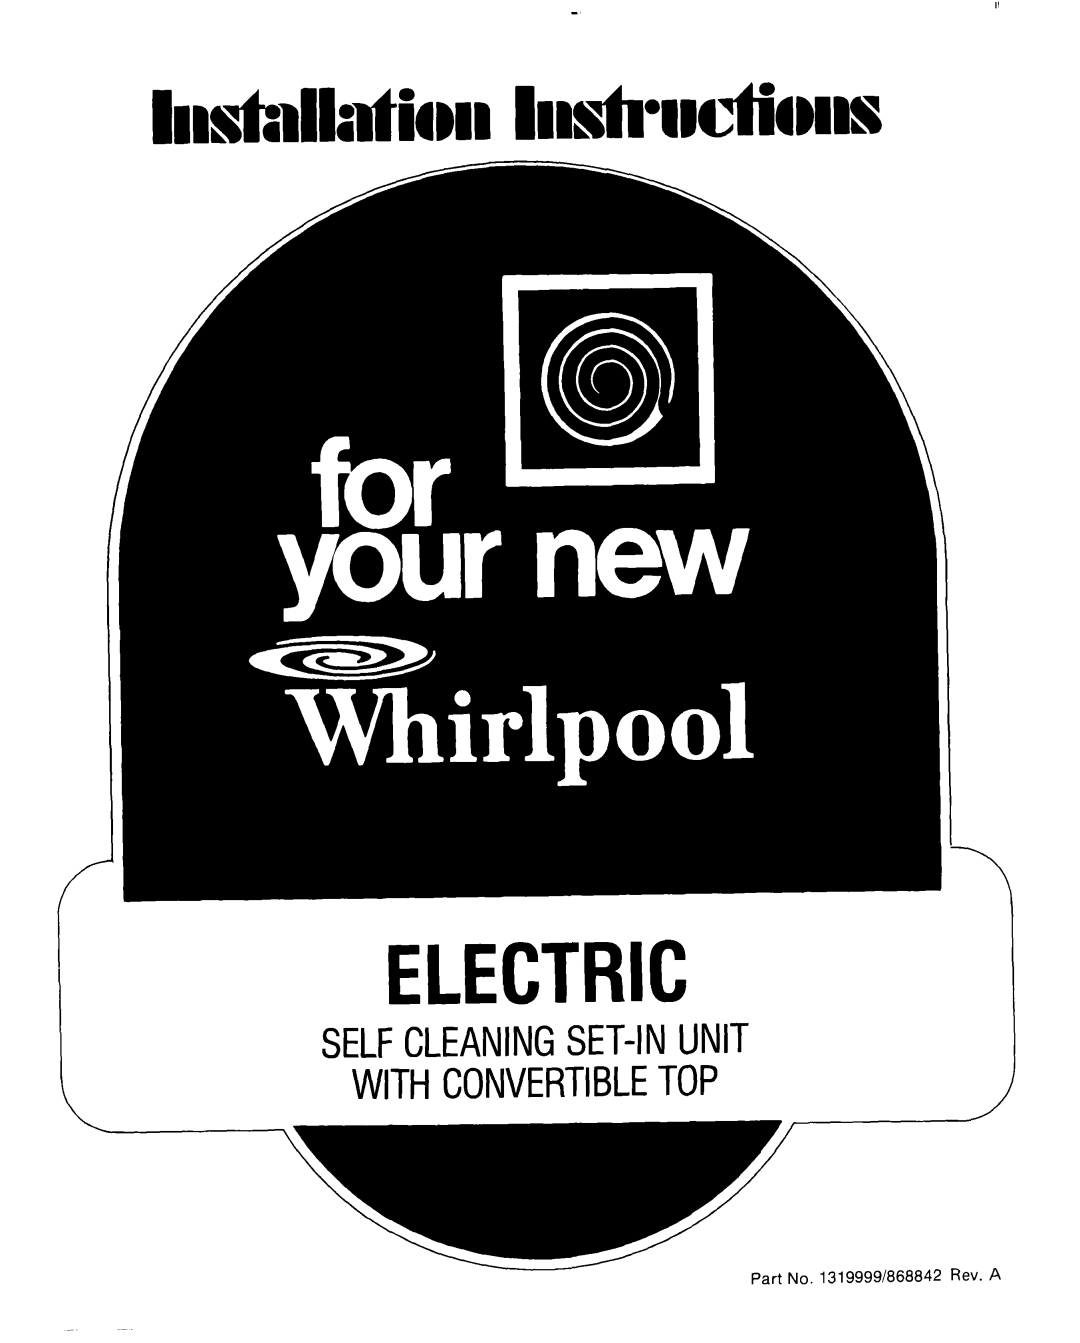 Whirlpool 1.32E+13 manual Part No. 13199991868842 Rev. A, Electric, Selfcleaningset-Inunit Withconvertibletop 